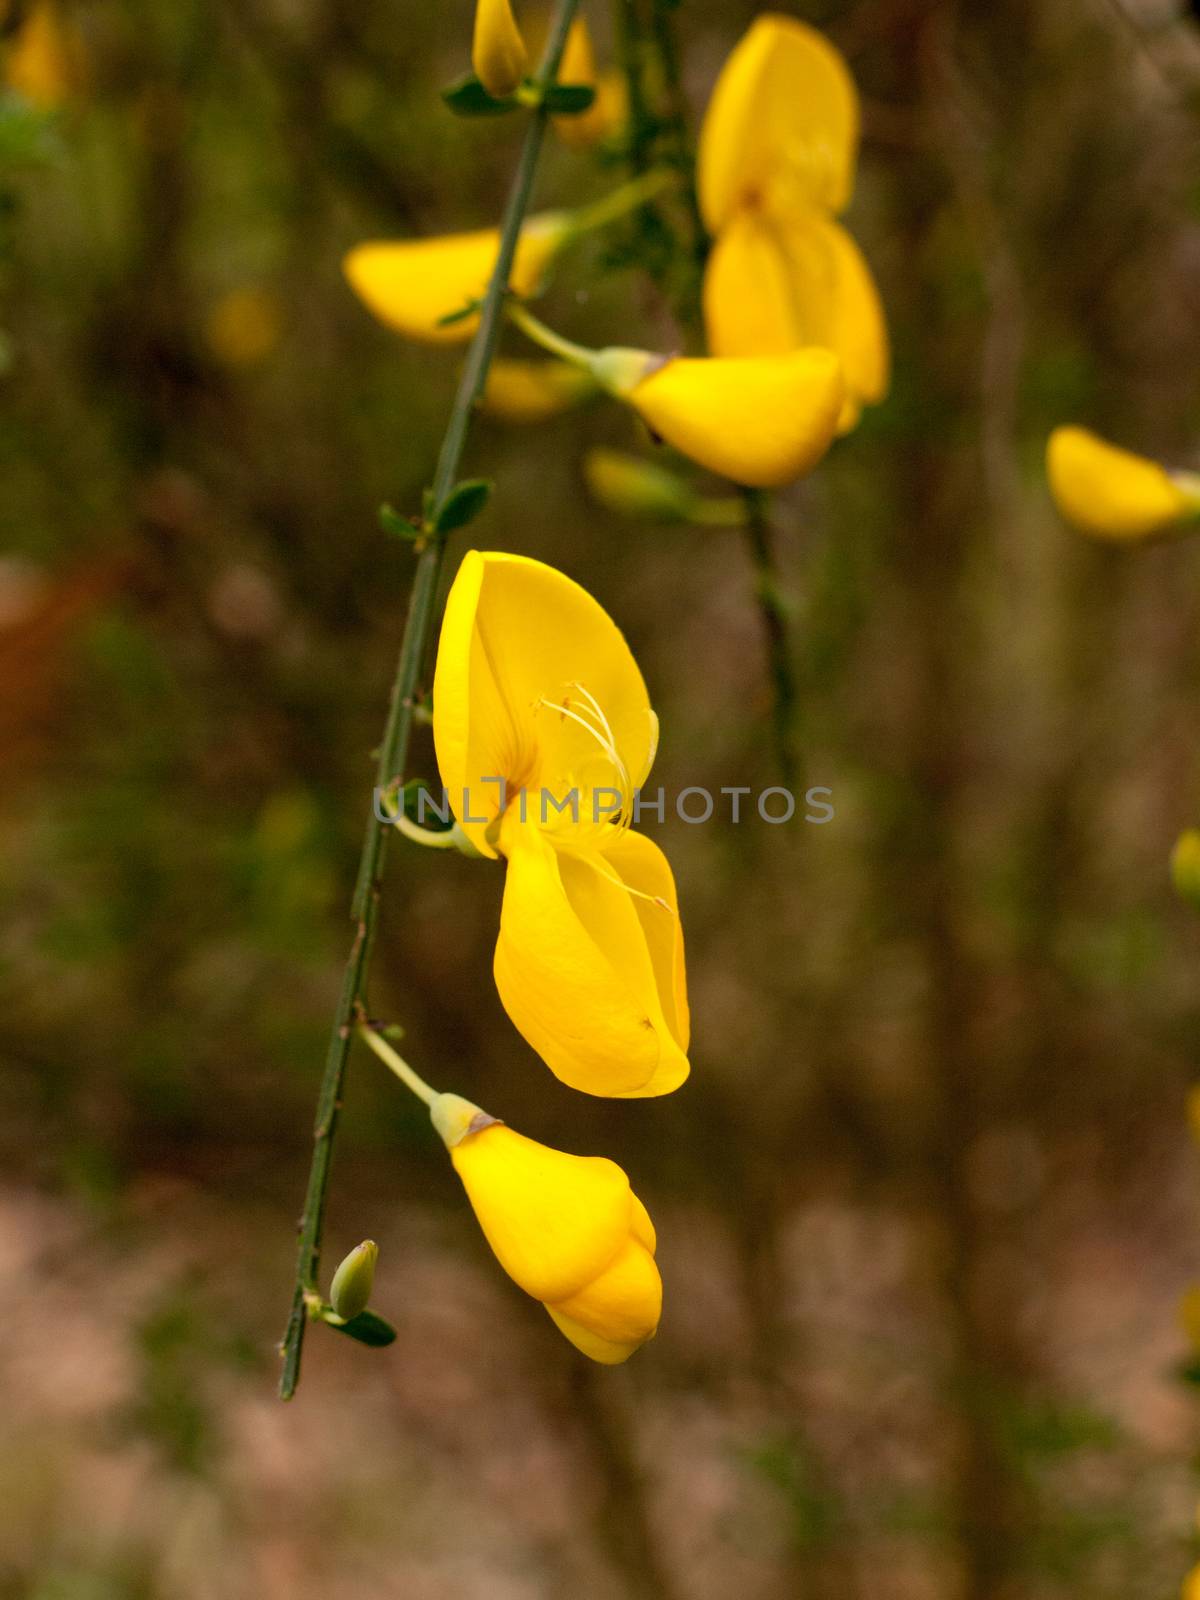 A close up shot of some yellow gorse hanging off its plant